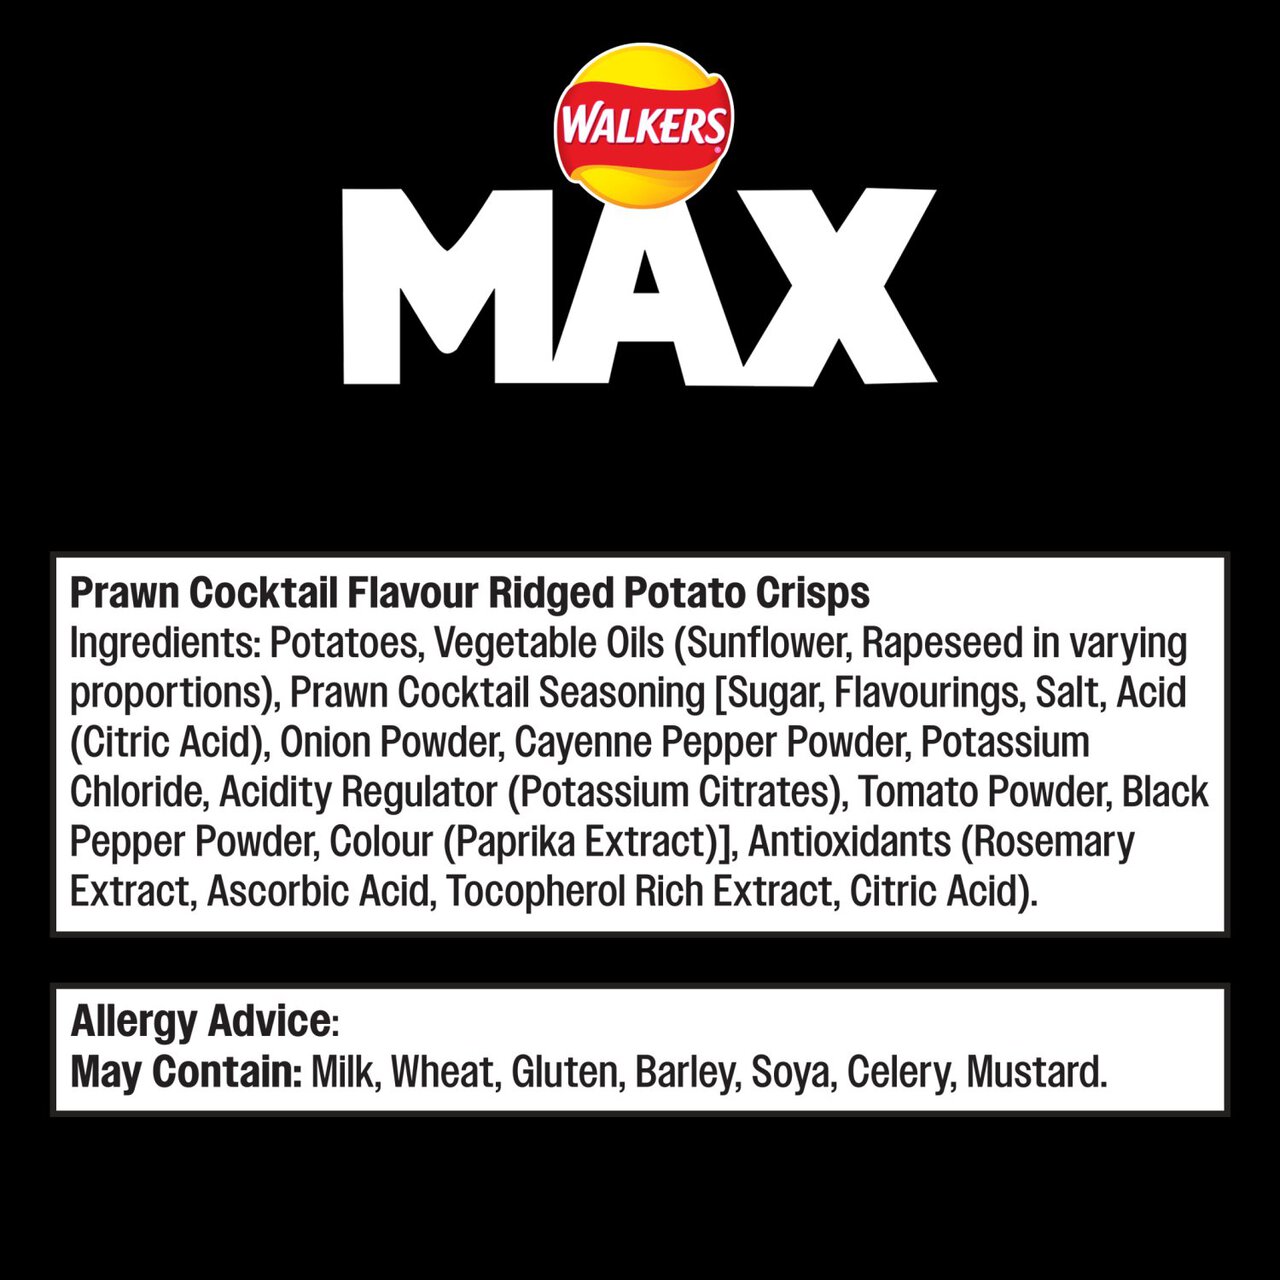 Walkers Max Strong Fiery Prawn Cocktail Multipack Crisps 6 per pack